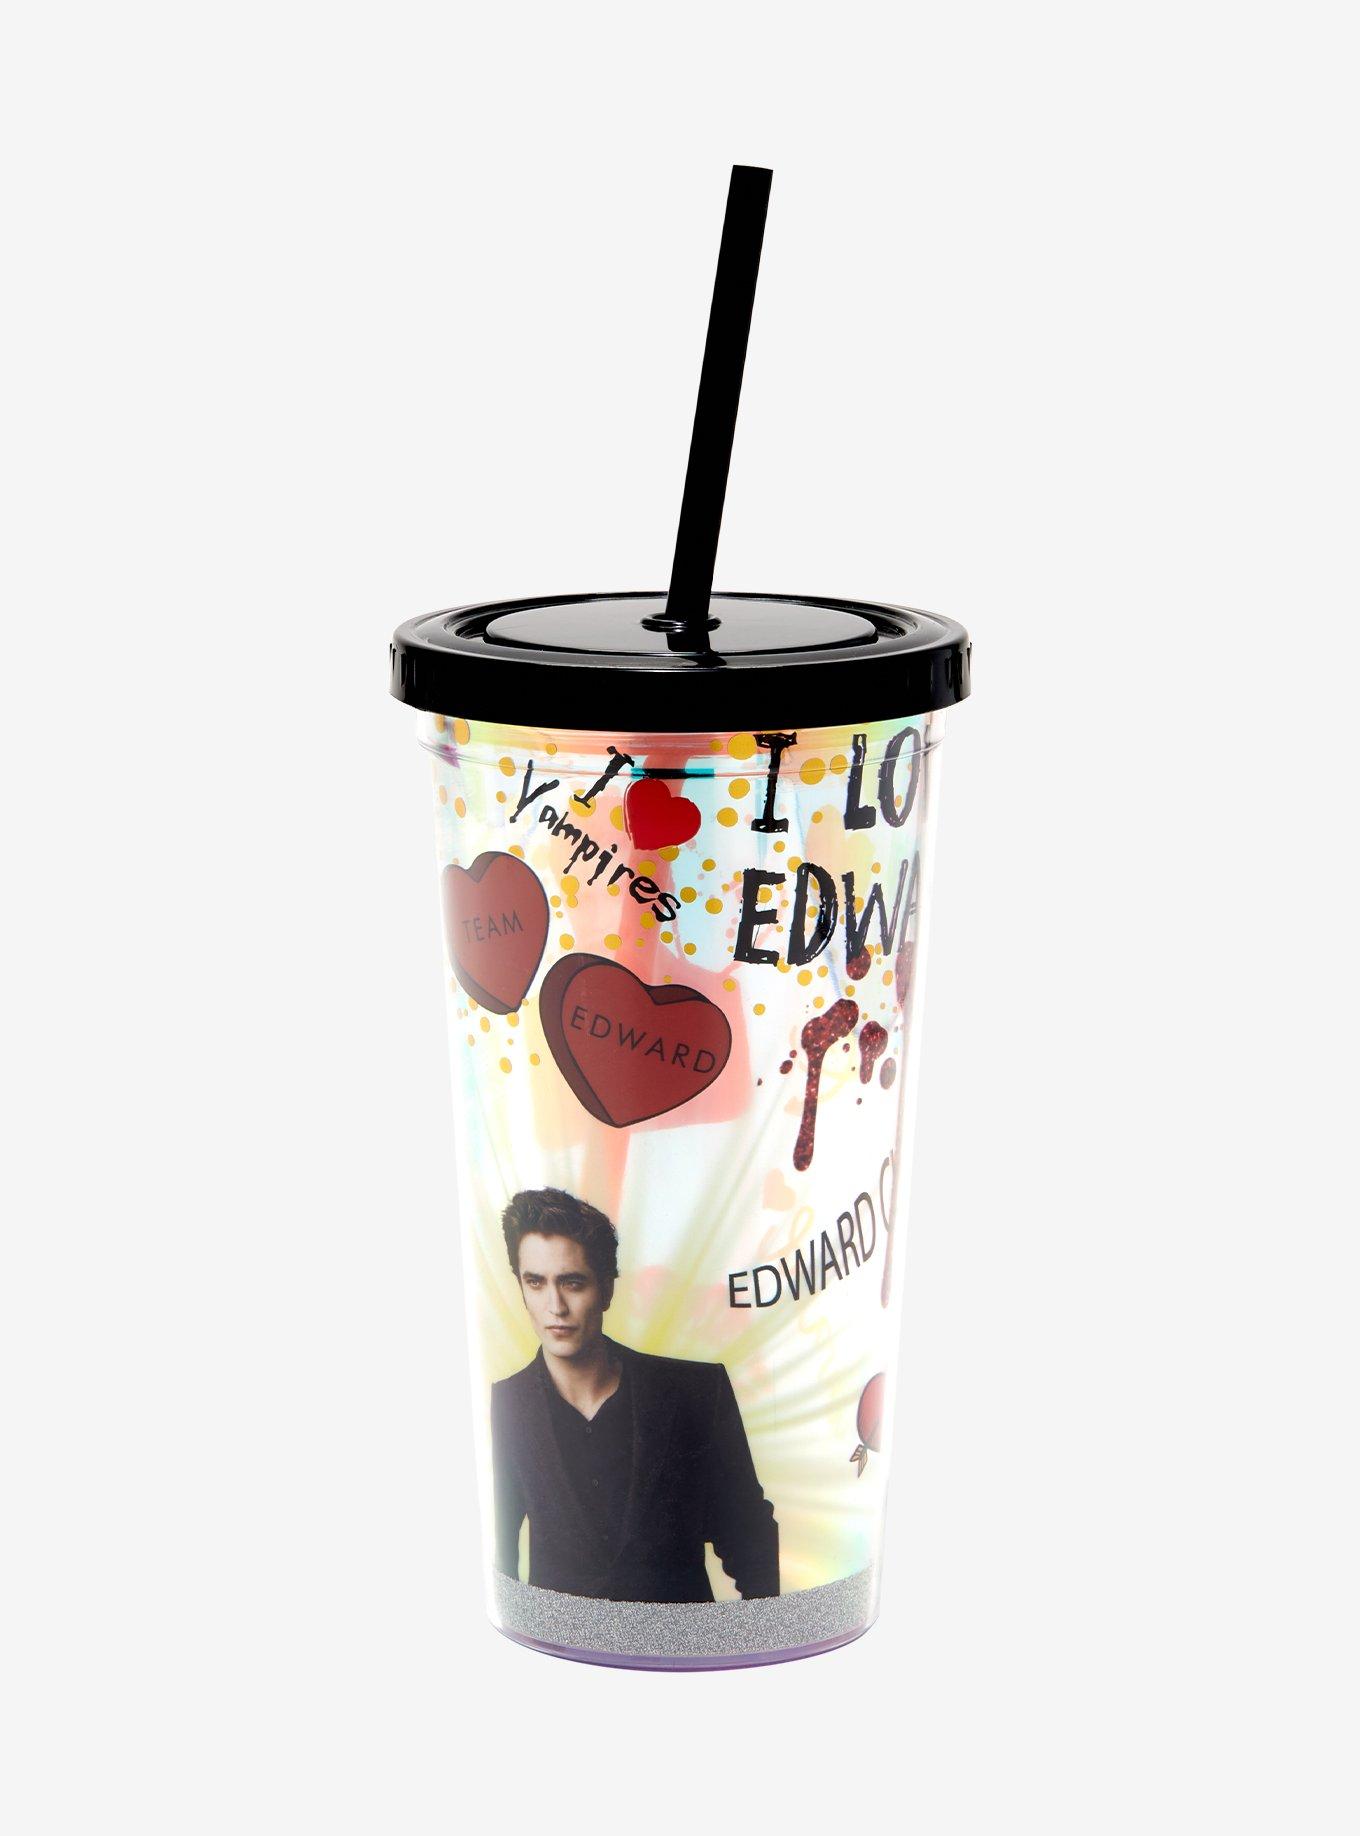 The Twilight Cup